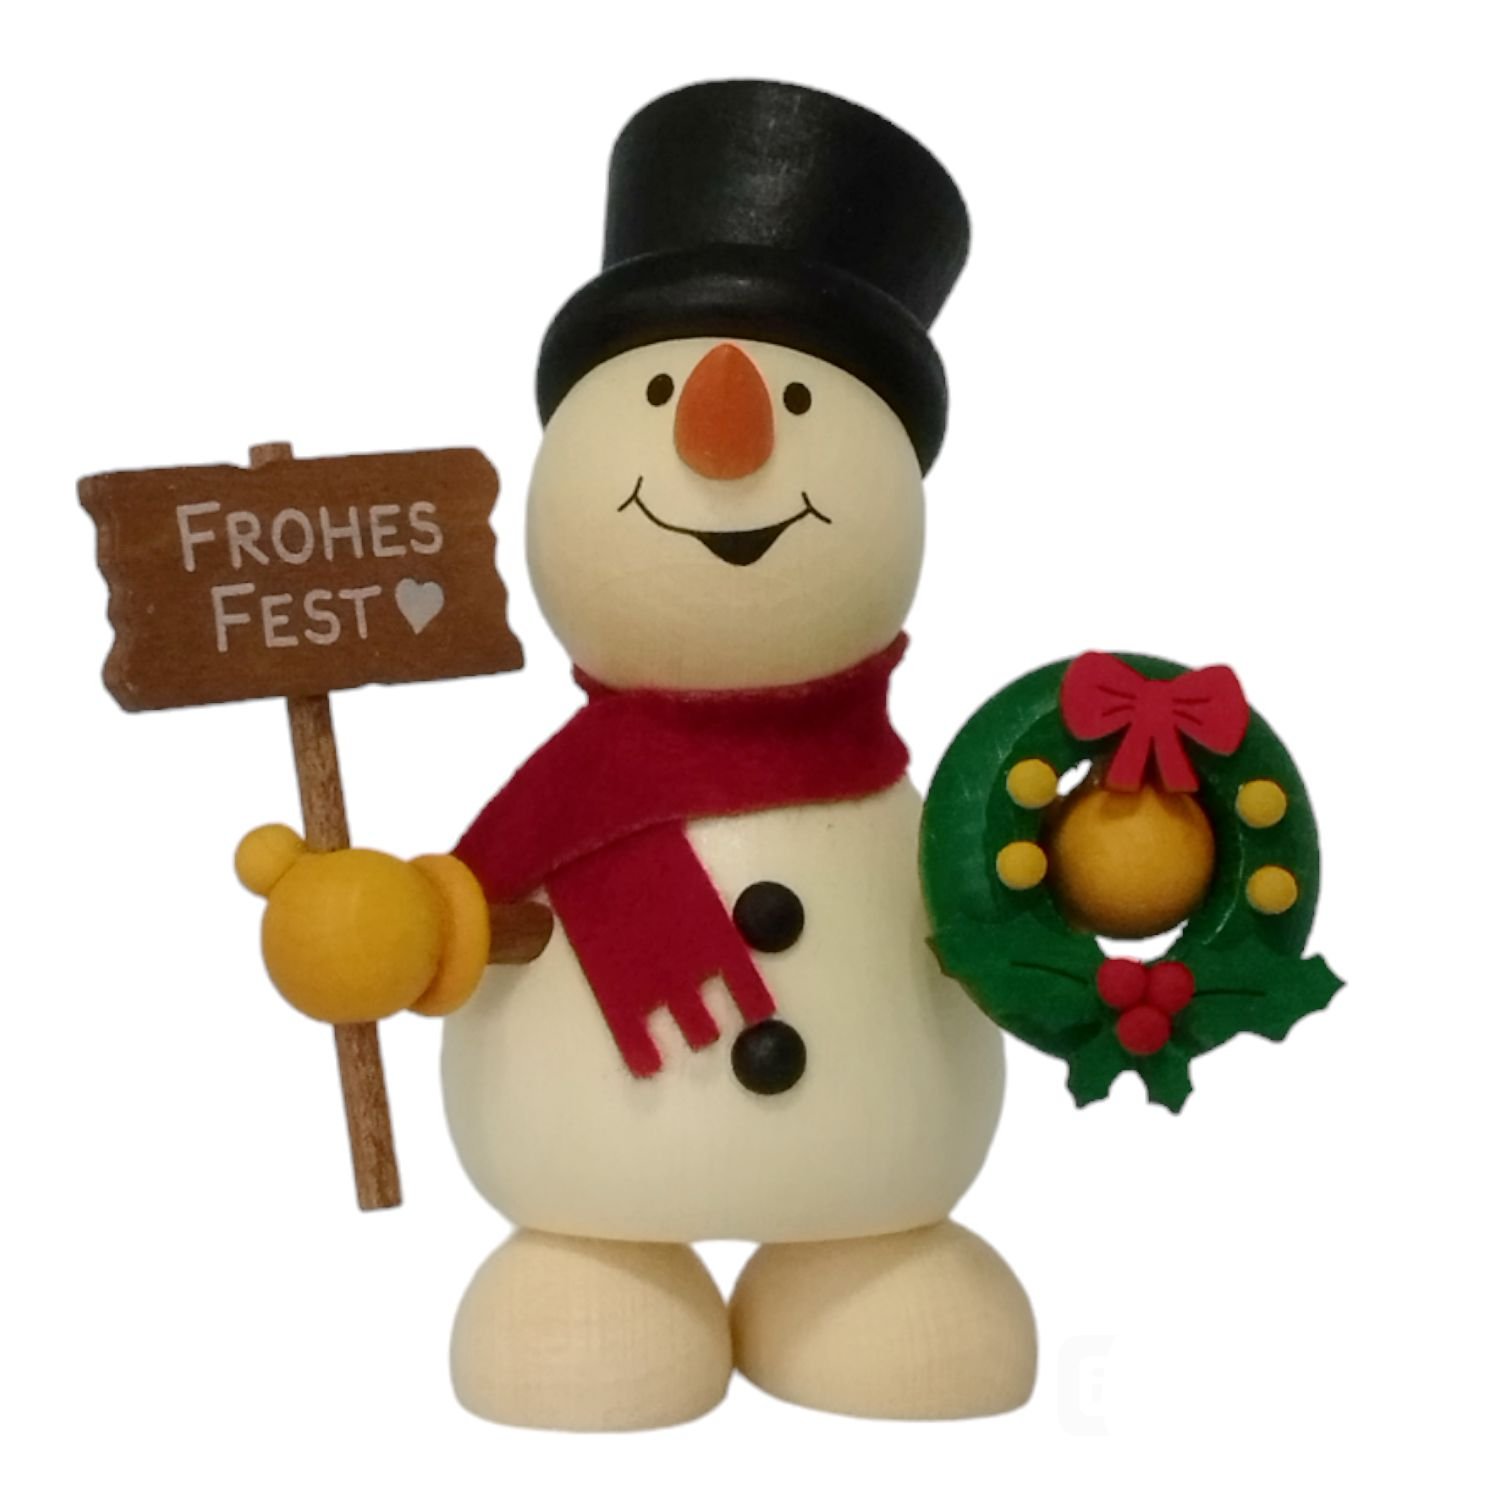 Snowman with Christmas wreath and sign